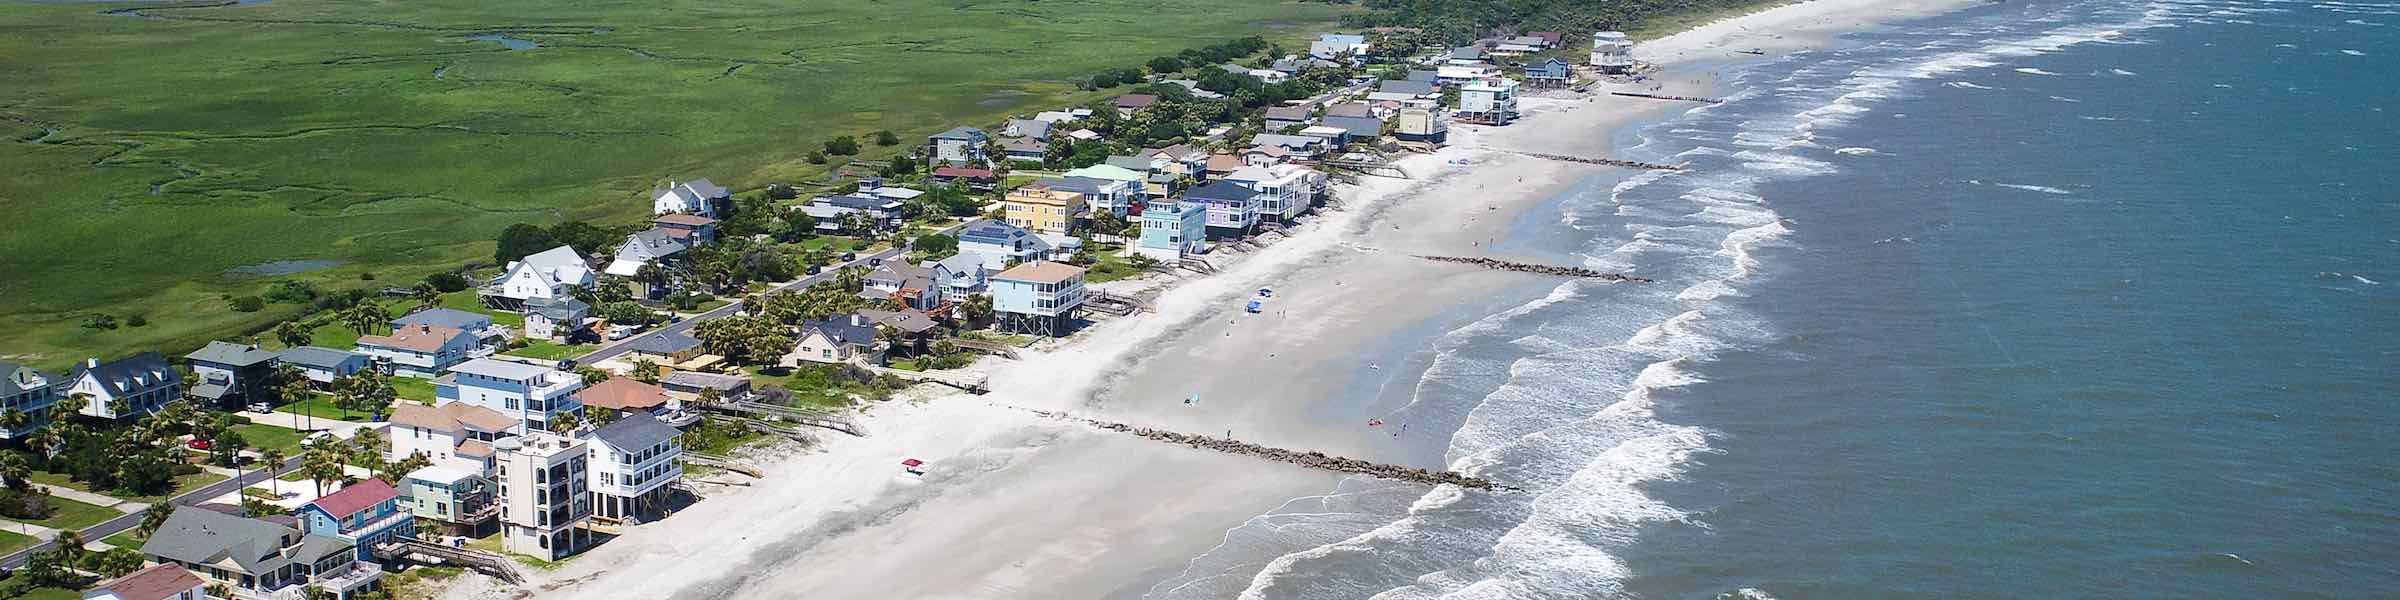 Aerial view of beach houses and marsh at Folly Beach, SC.